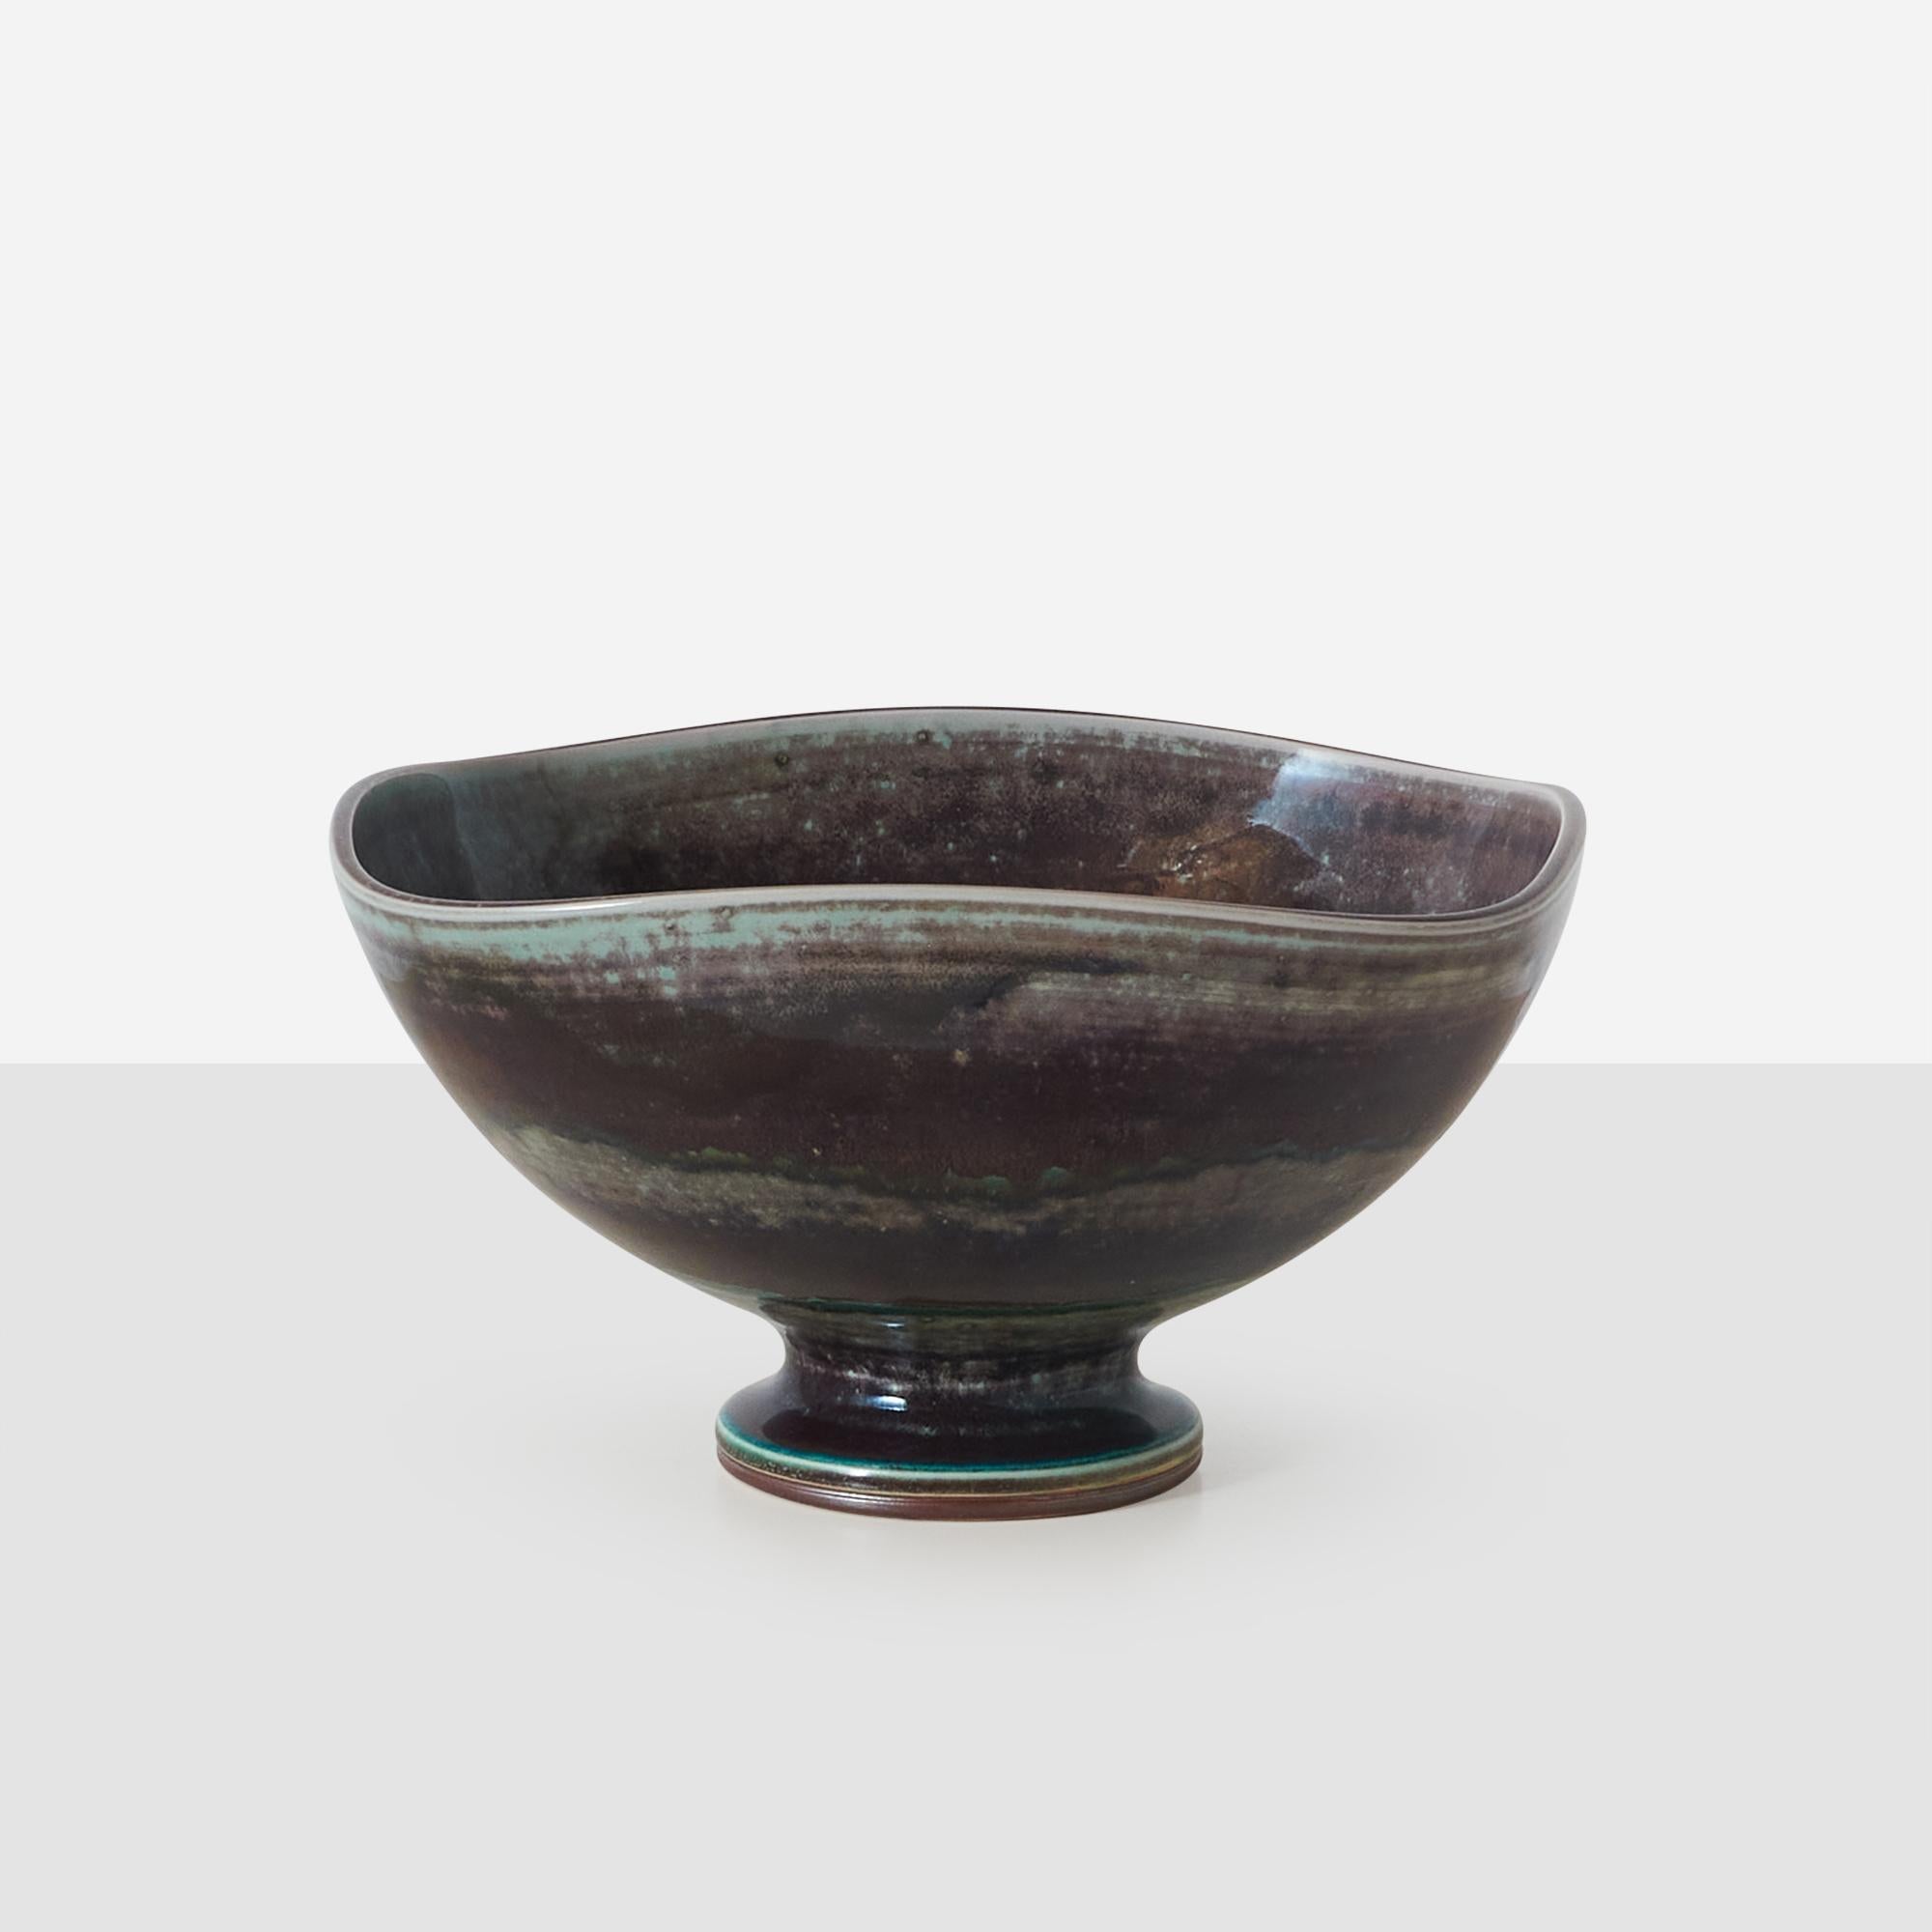 A large and unique organic shaped footed ceramic bowl in hues of blue, green and brown by Berndt Friberg for Gustavsberg. Incised Friberg signature, 1974 and Gustavsburg studio hand on the base.